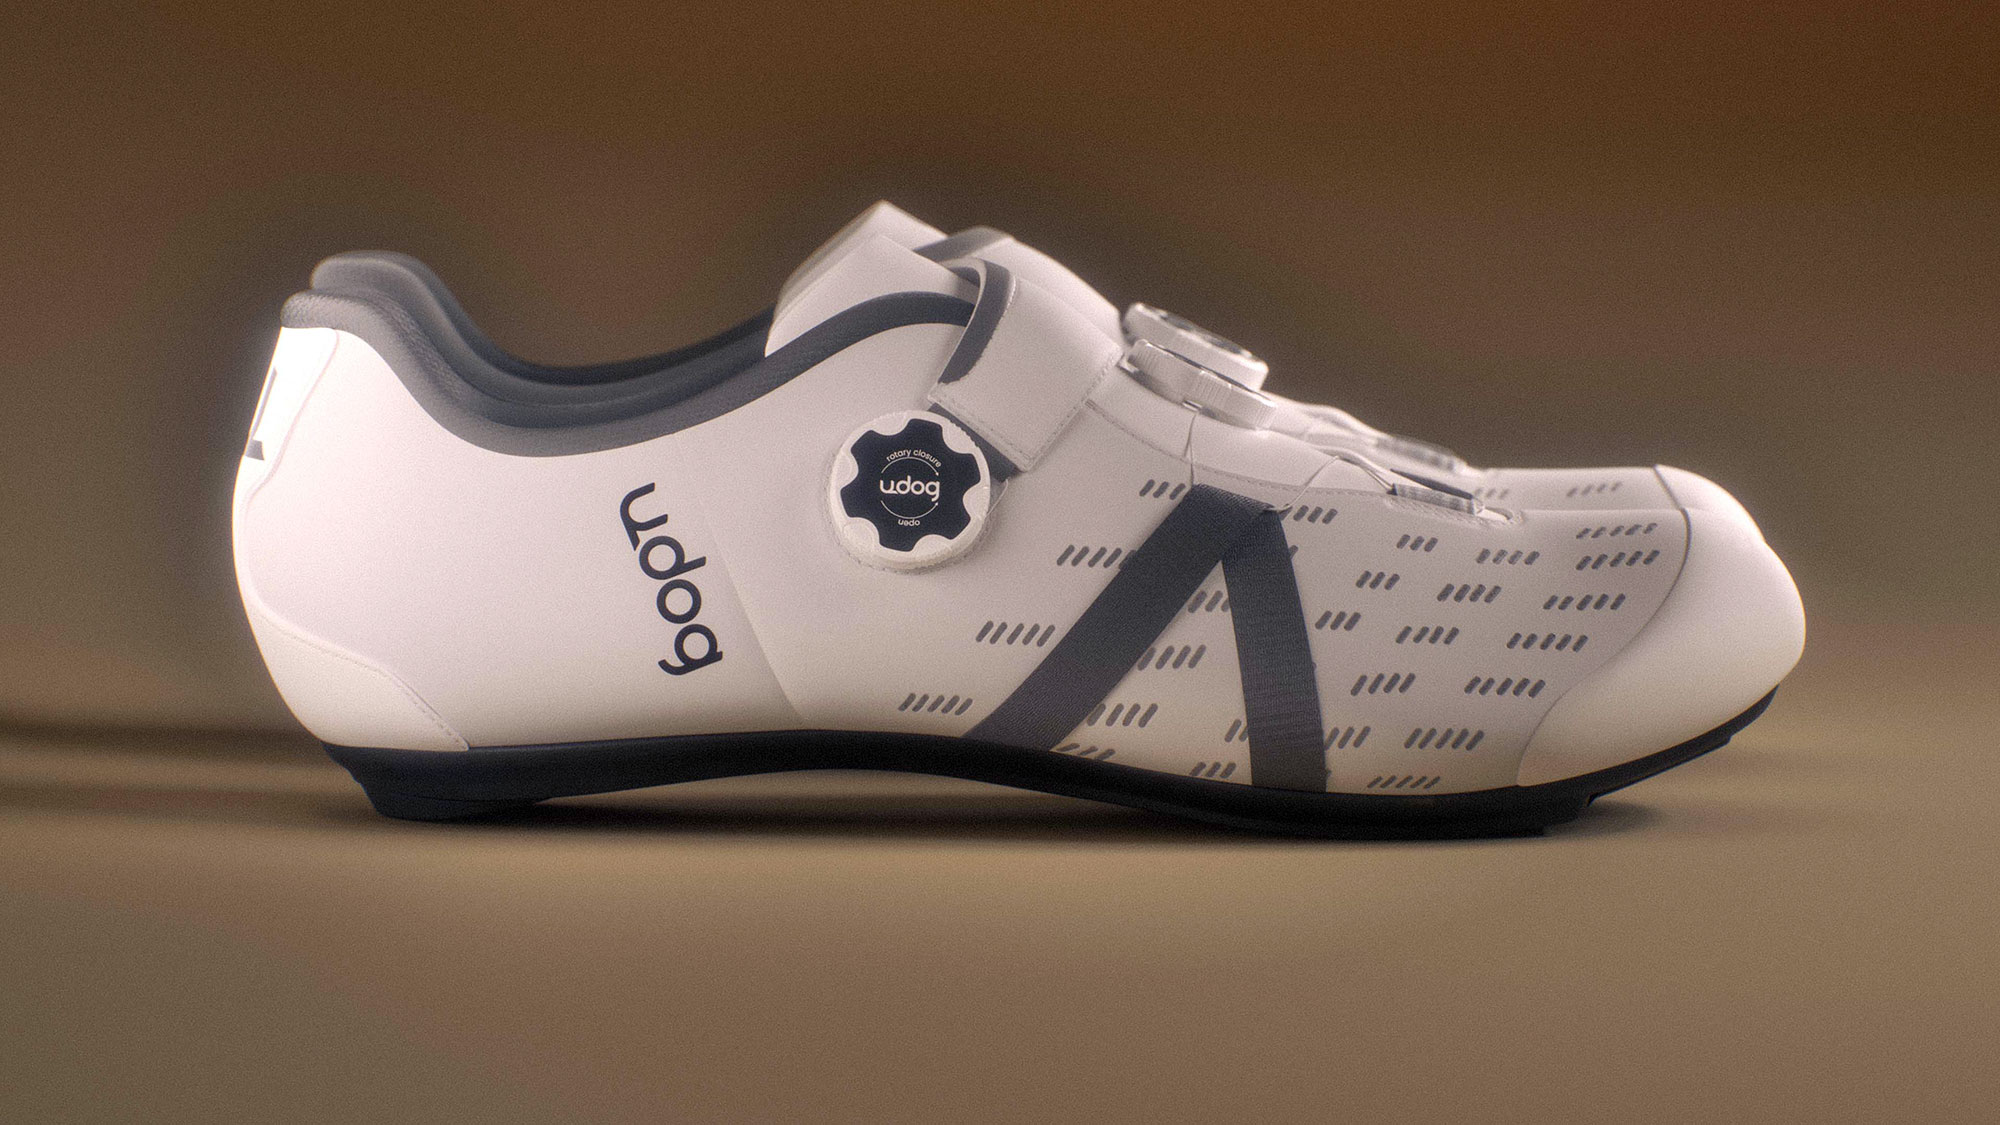 Udog Cento road shoes, new custom dial-retention fit stiff carbon road cycling shoes, side view